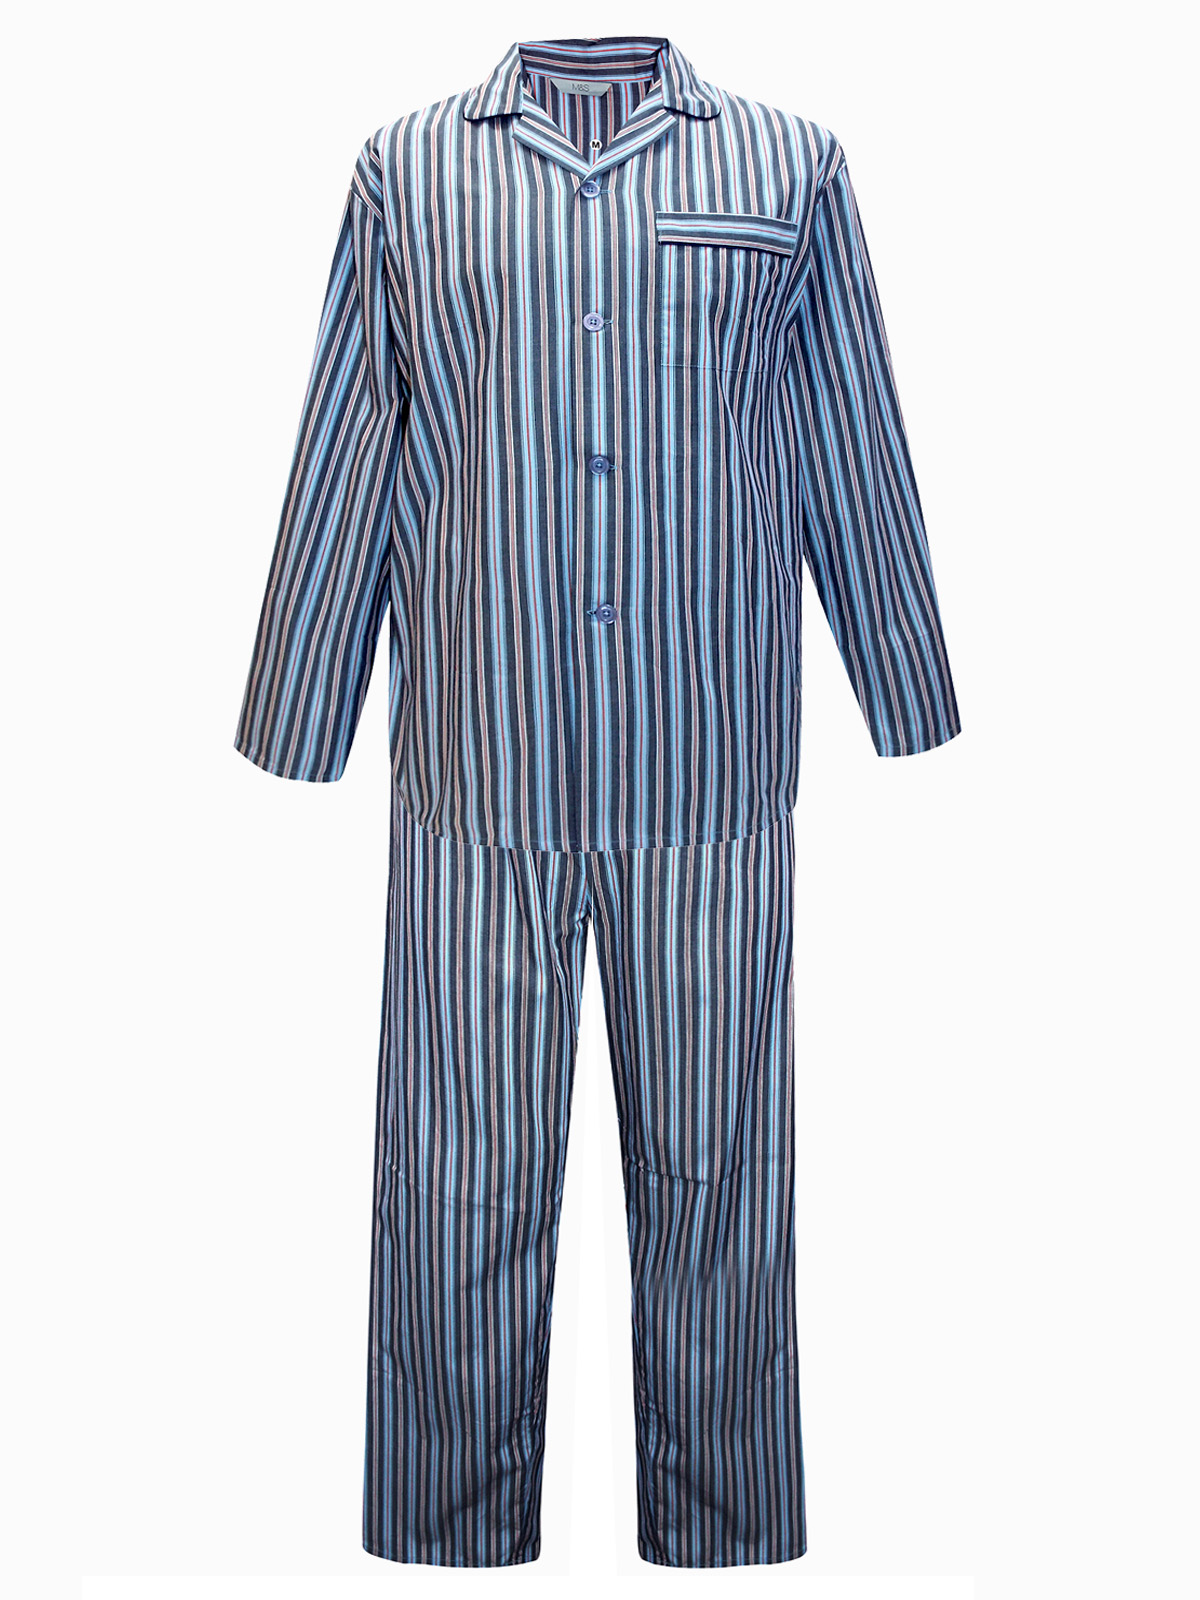 Marks and Spencer - - M&5 RED Mens Striped Pyjama Set - Size Small to XXL